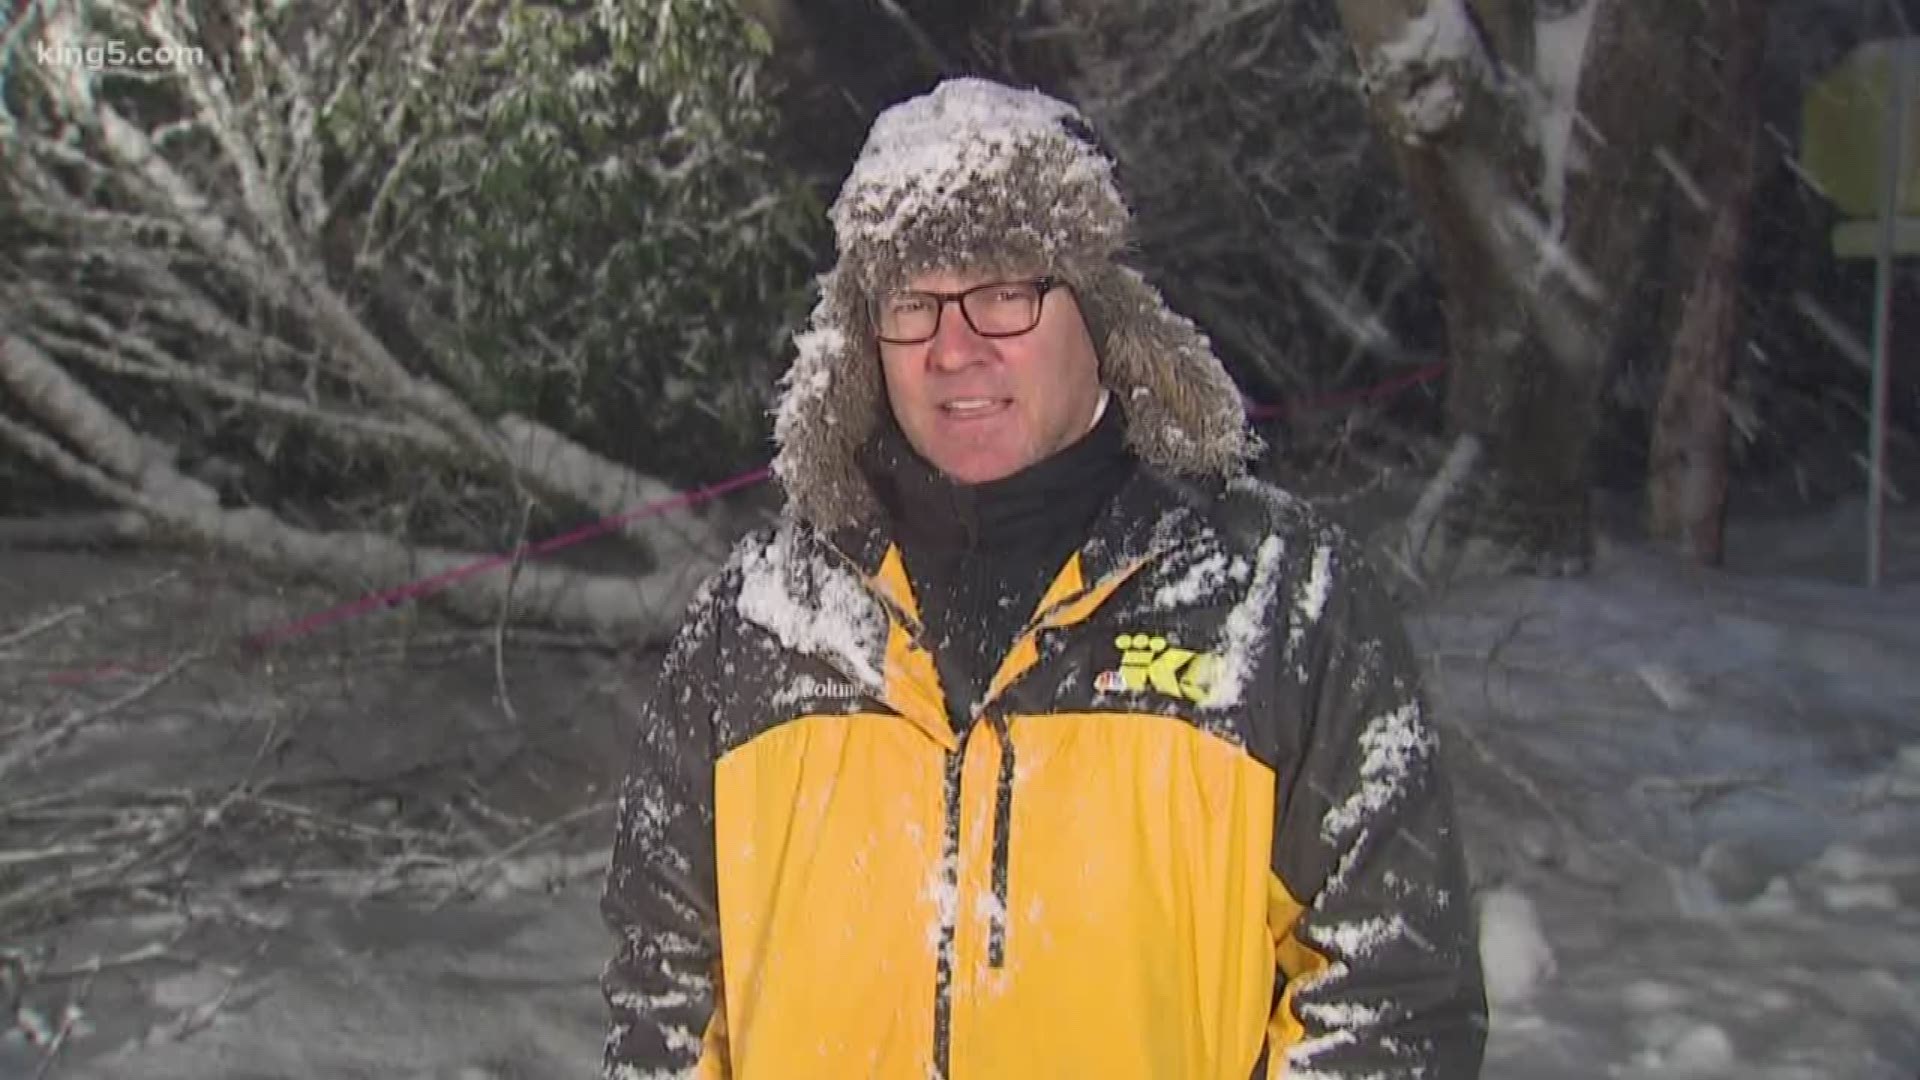 KING 5's Drew Mikkelsen reports from Thurston County on Sunday, where heavy snow caused power outages and major closures.